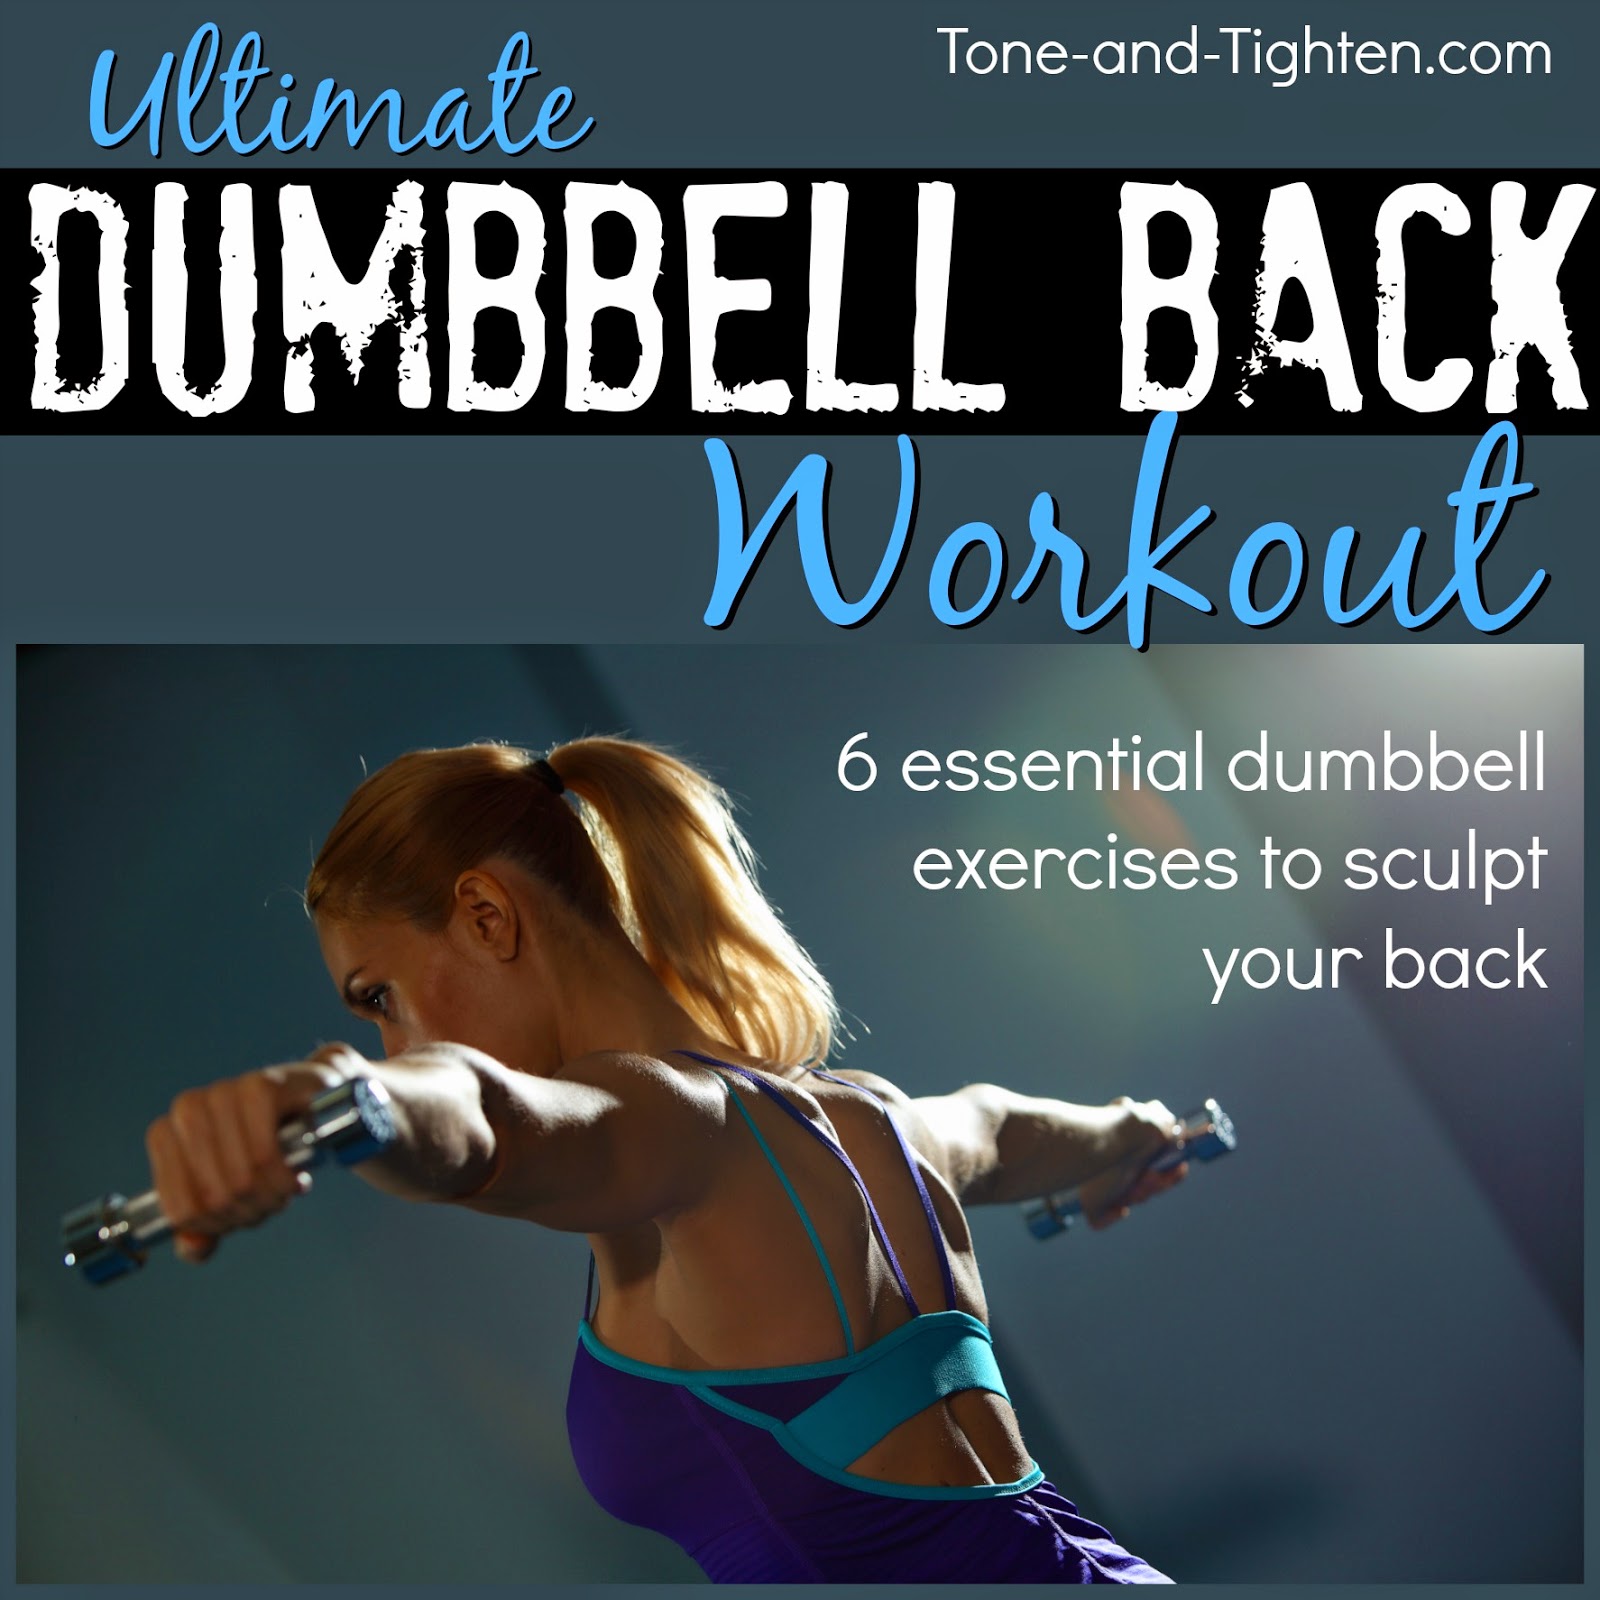 Simple A Tighter U Workout Plan for Burn Fat fast